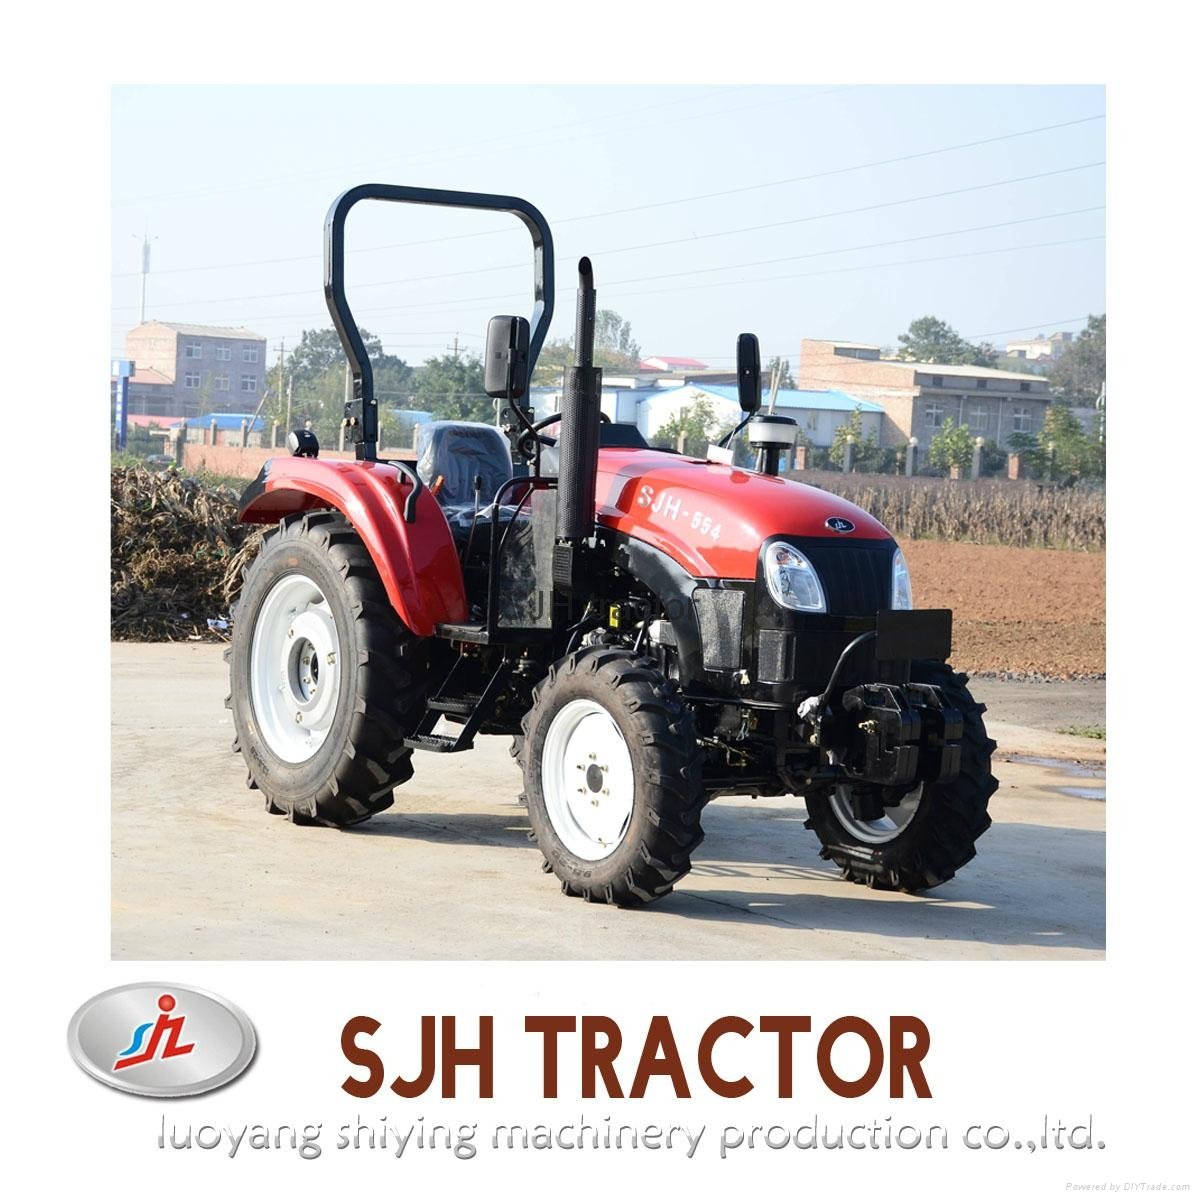 China SJH 55hp 4wd farming tractor mini tractor price list product list 3